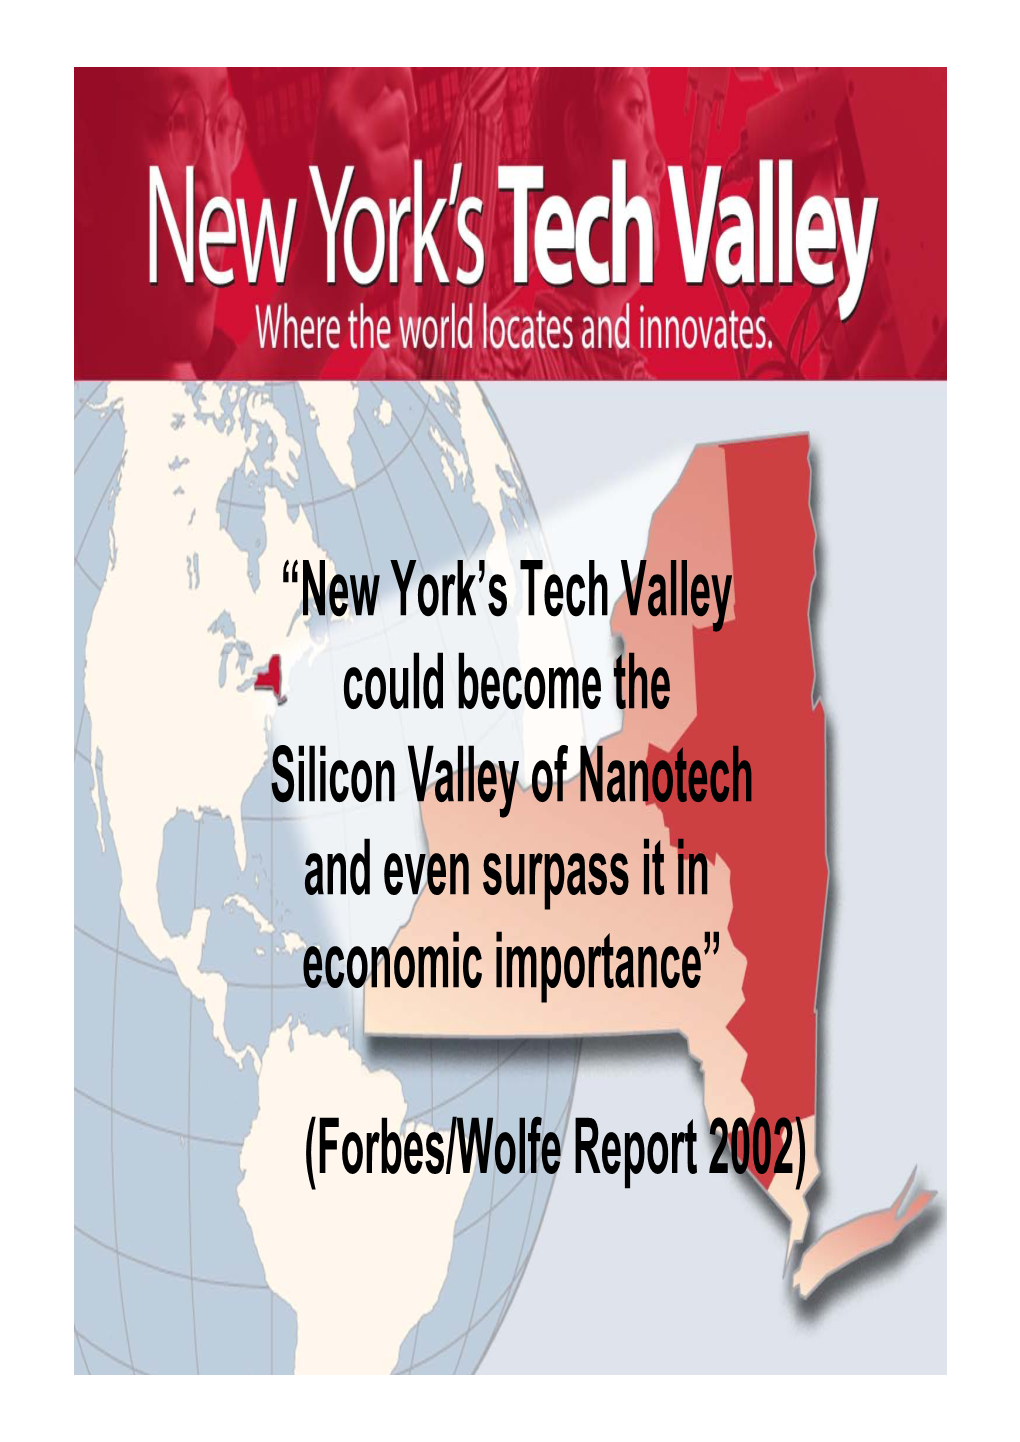 New York's Tech Valley Could Become the Silicon Valley of Nanotech And